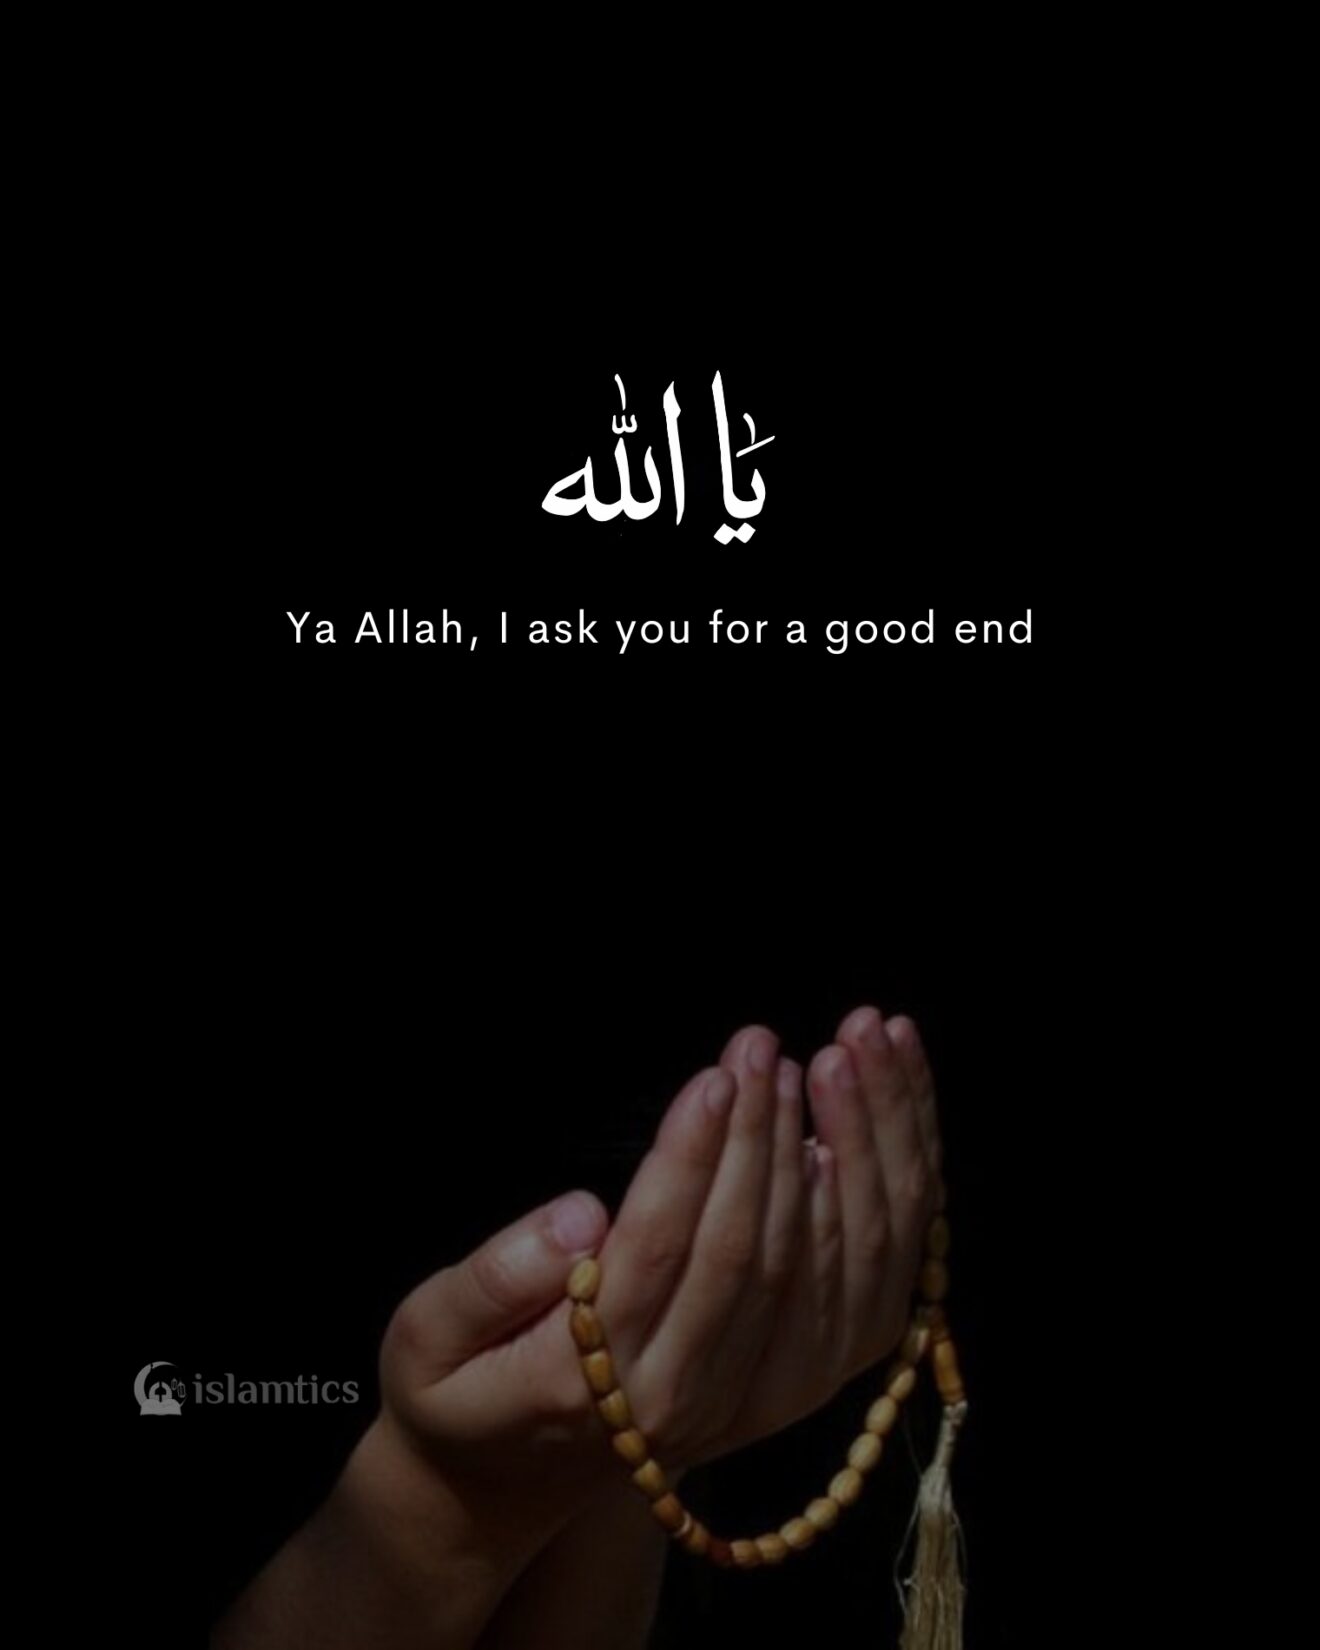 Ya Allah, I ask you for a good end